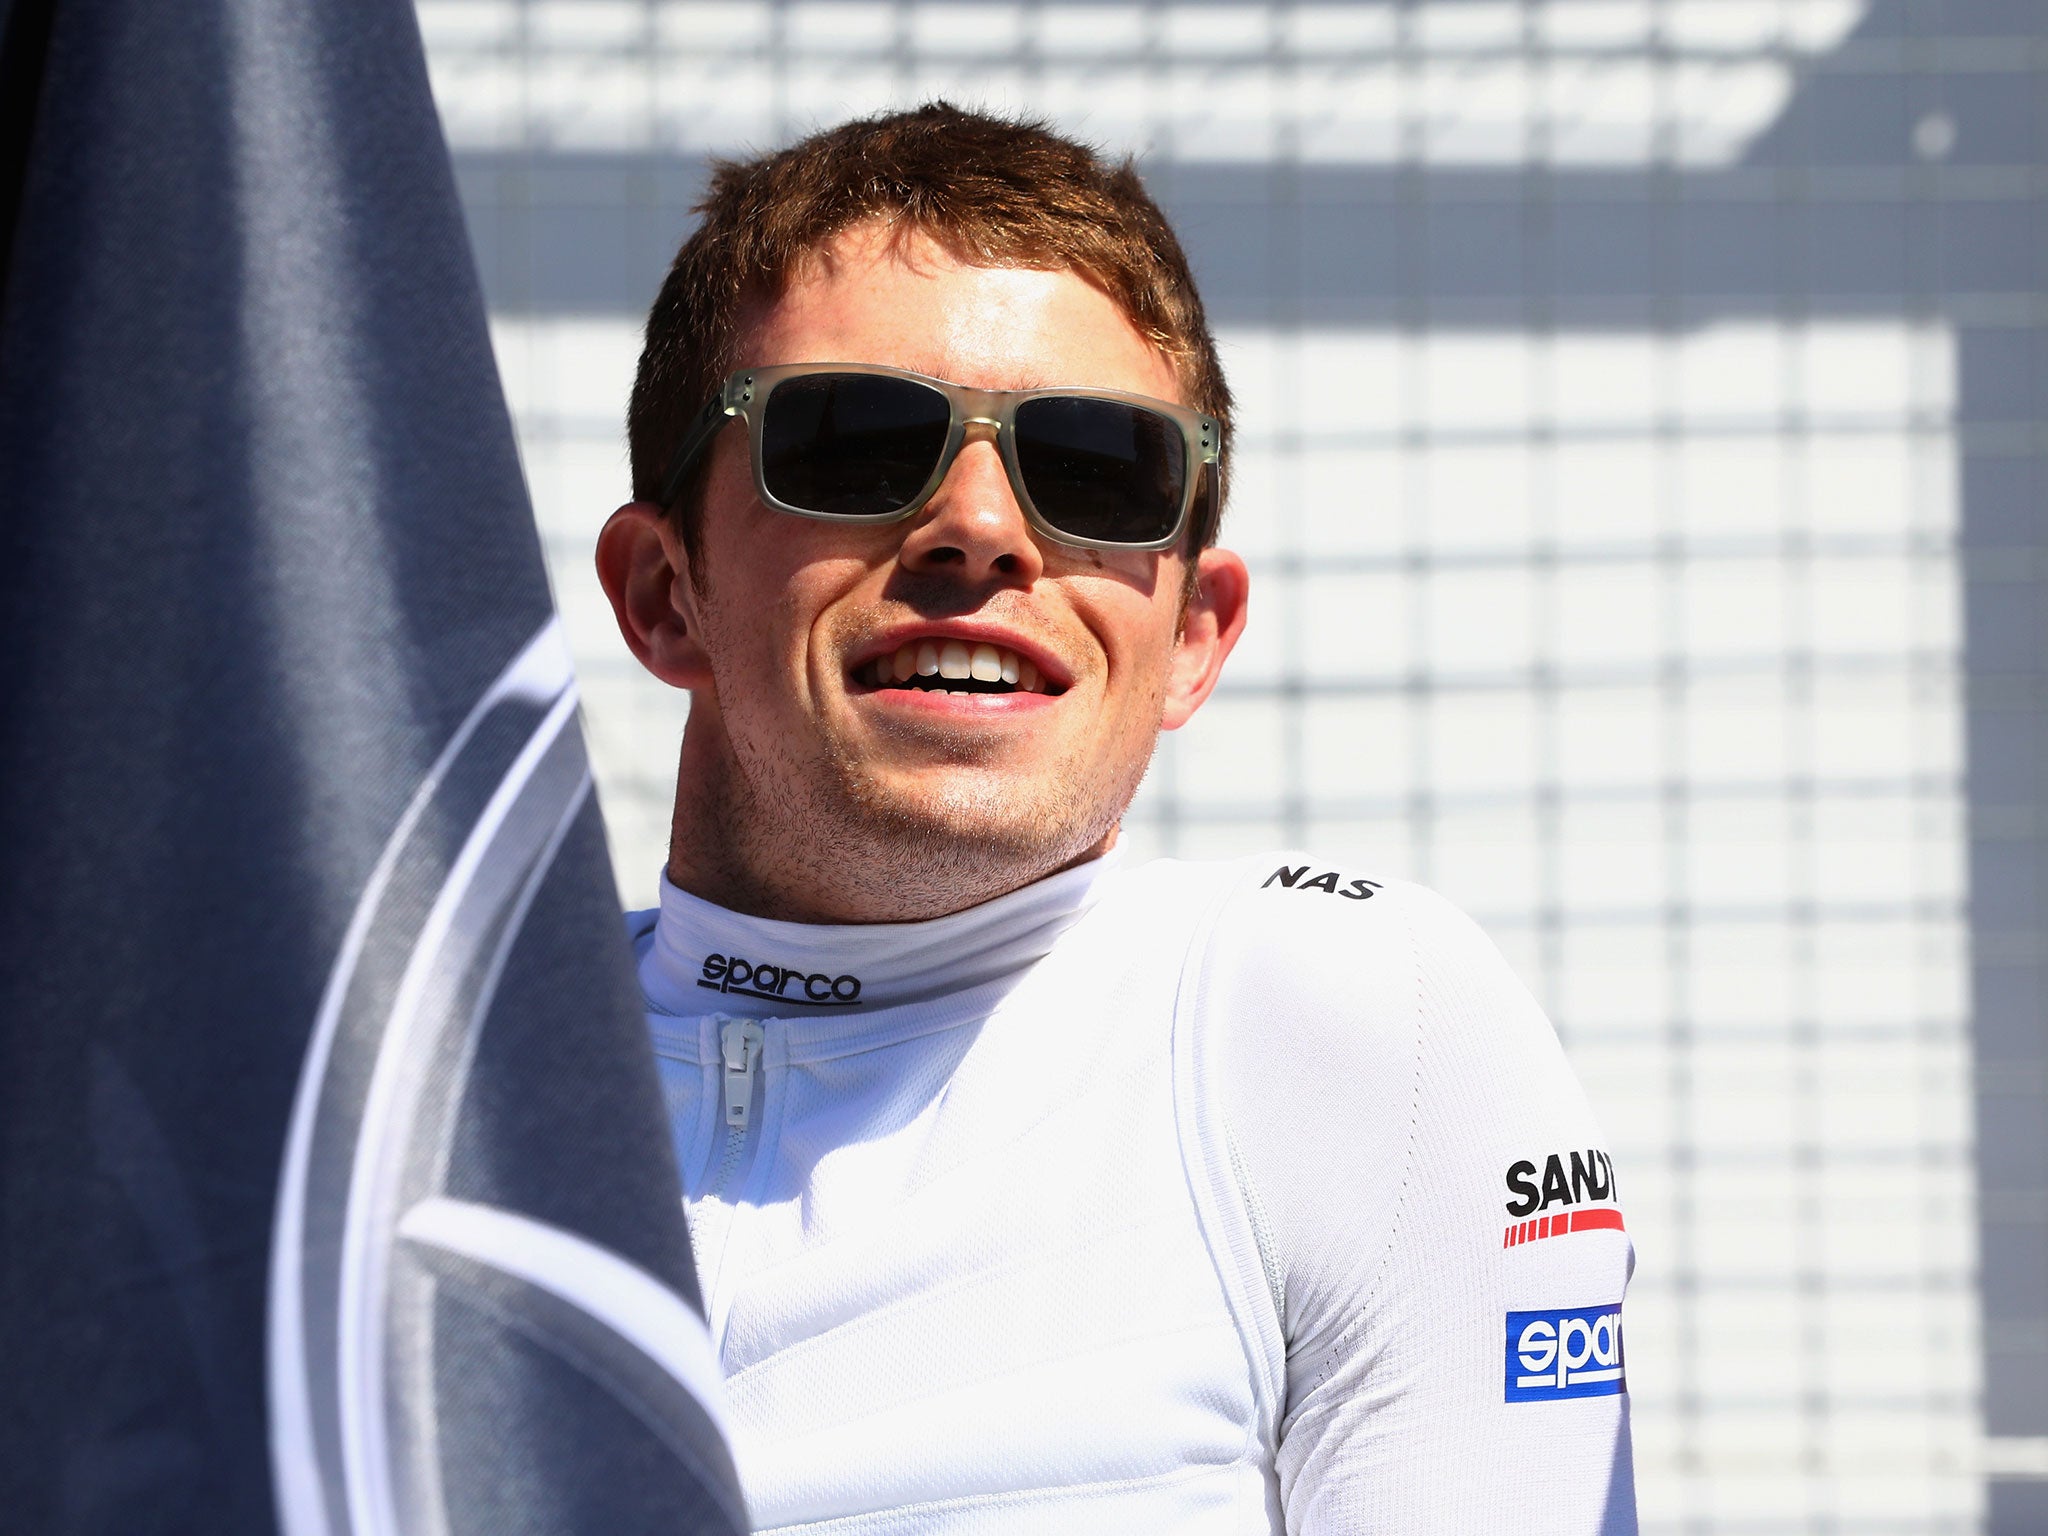 Paul Di Resta added that the only conclusion is that Piastri has landed a seat at another team